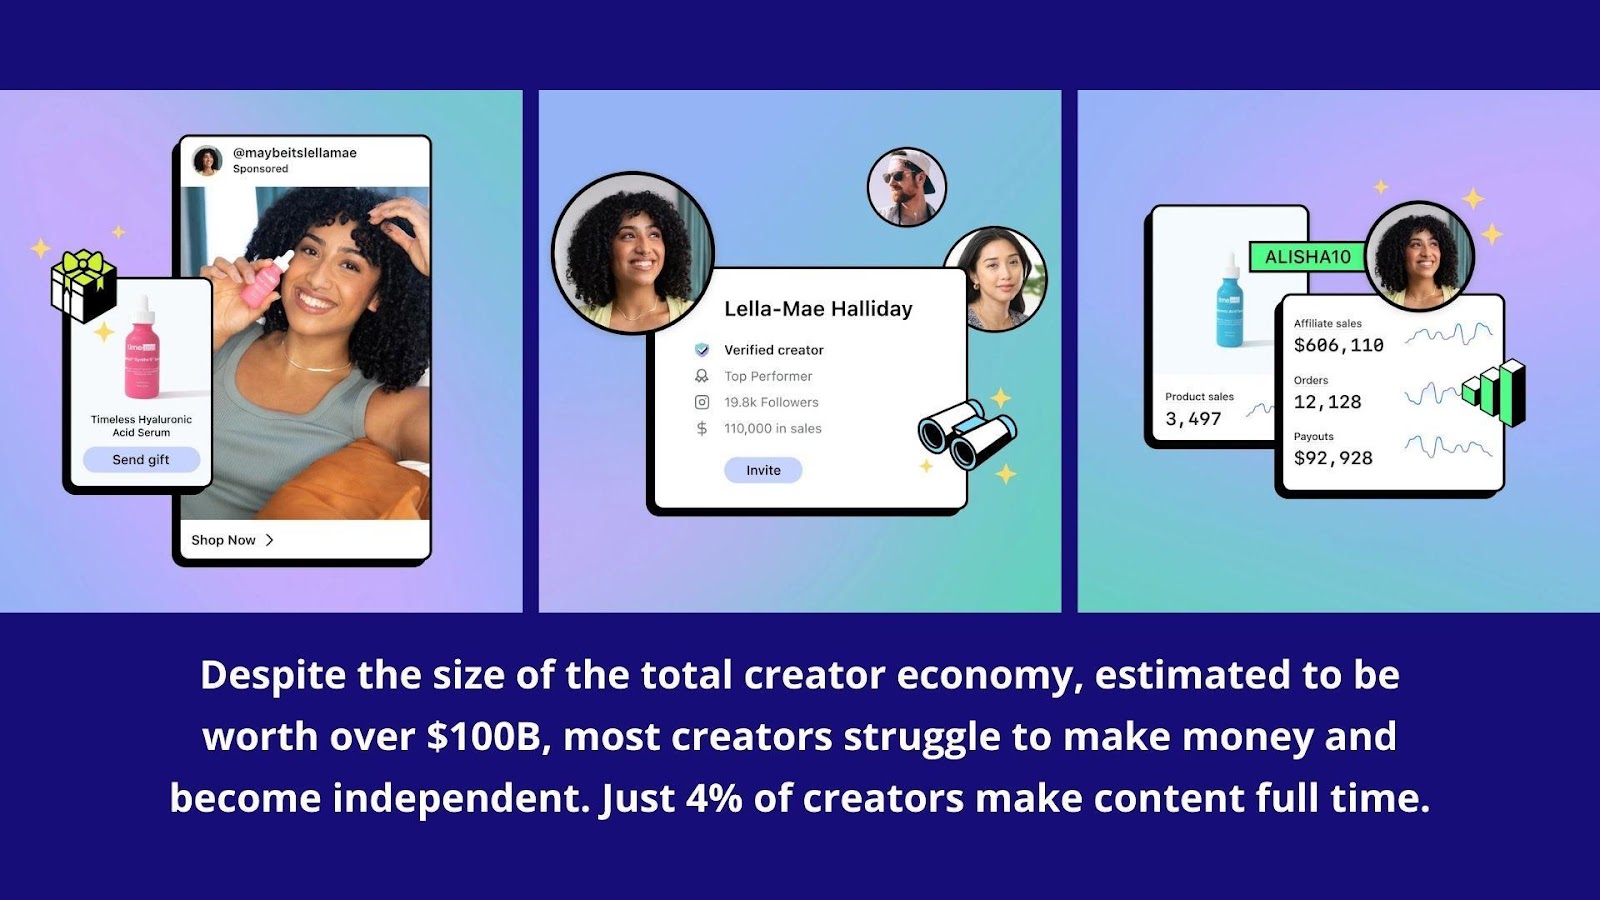 Despite the size of the total creator economy, estimated to be worth over $100B, most creators struggle to make money and become independent. Just 4% of creators make content full-time.